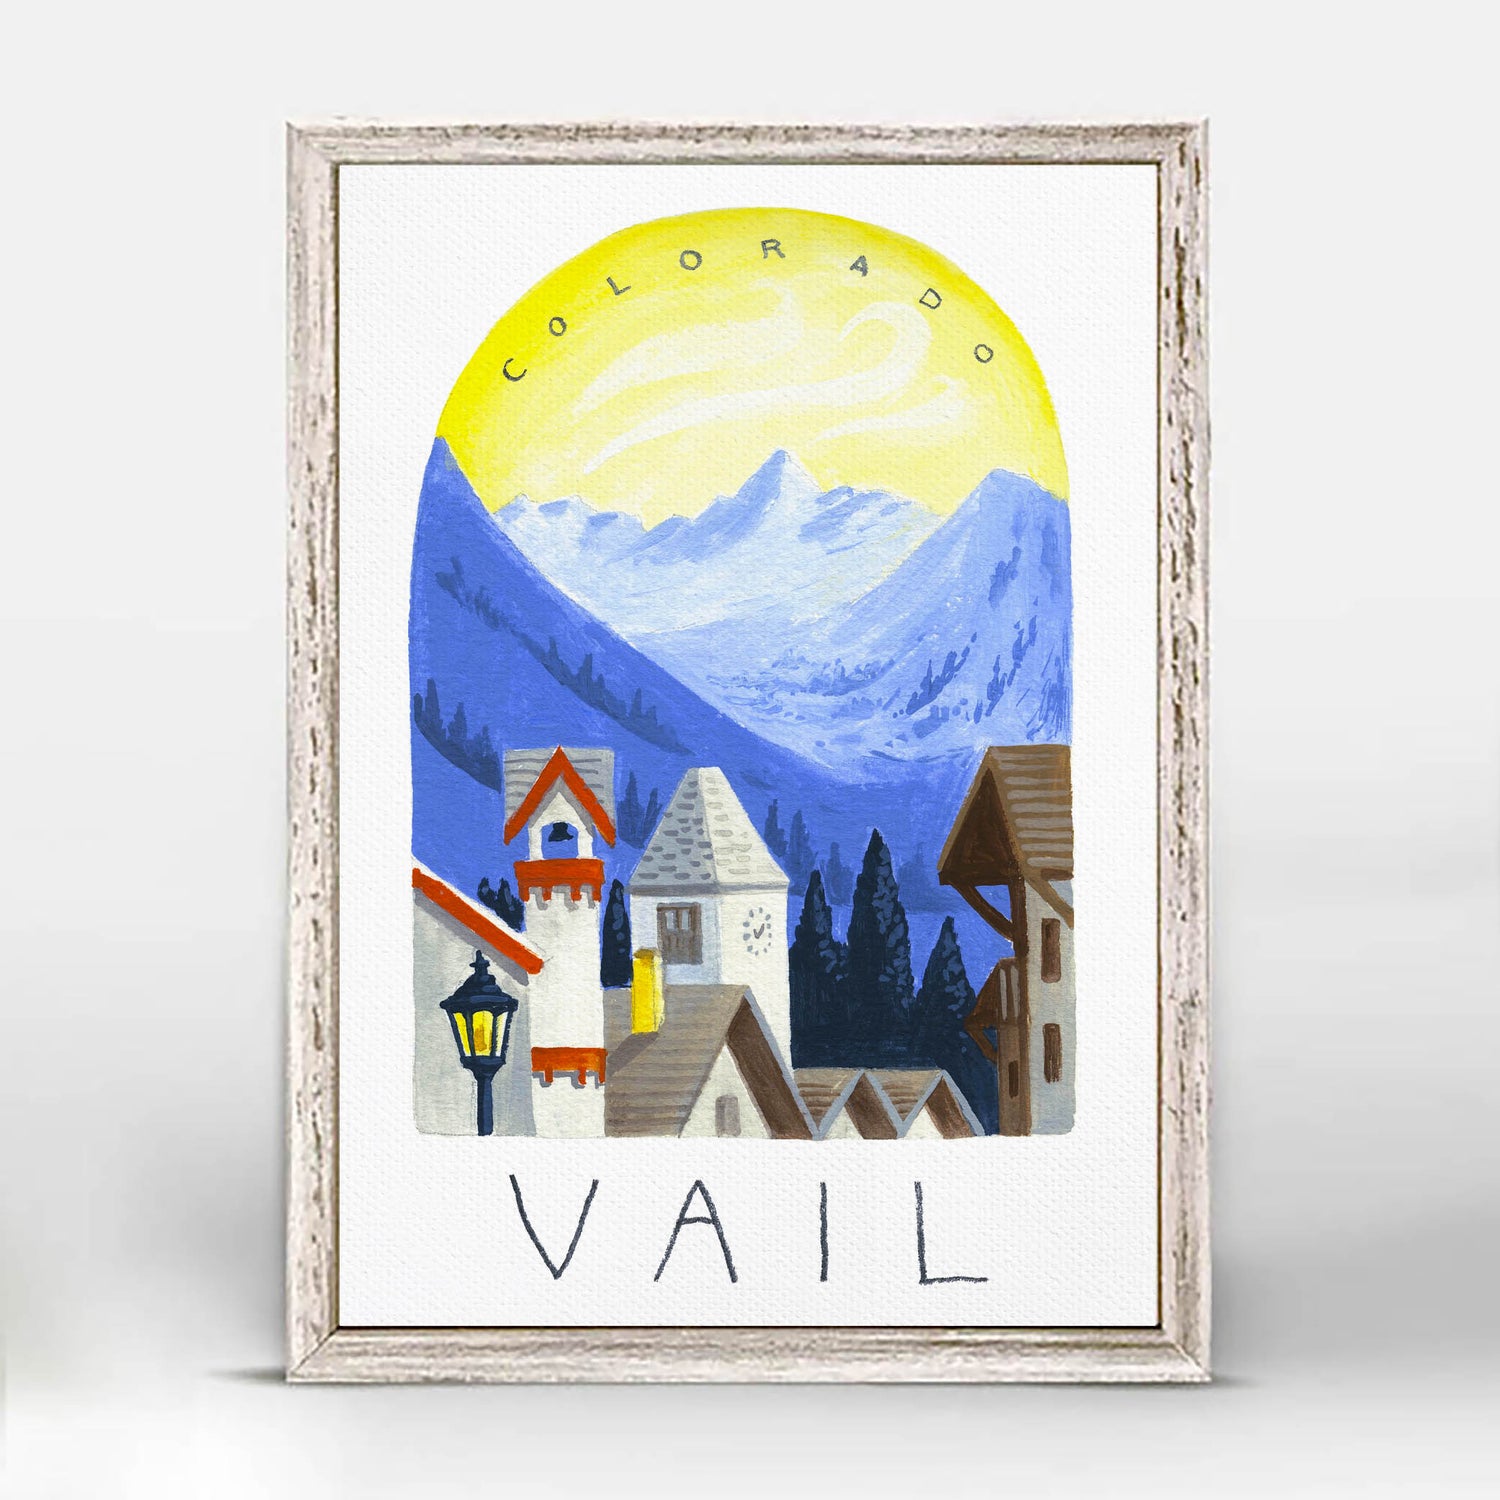 Vail art with Vail Village, ski resort, and mountains; trendy illustration by Angela Staehling